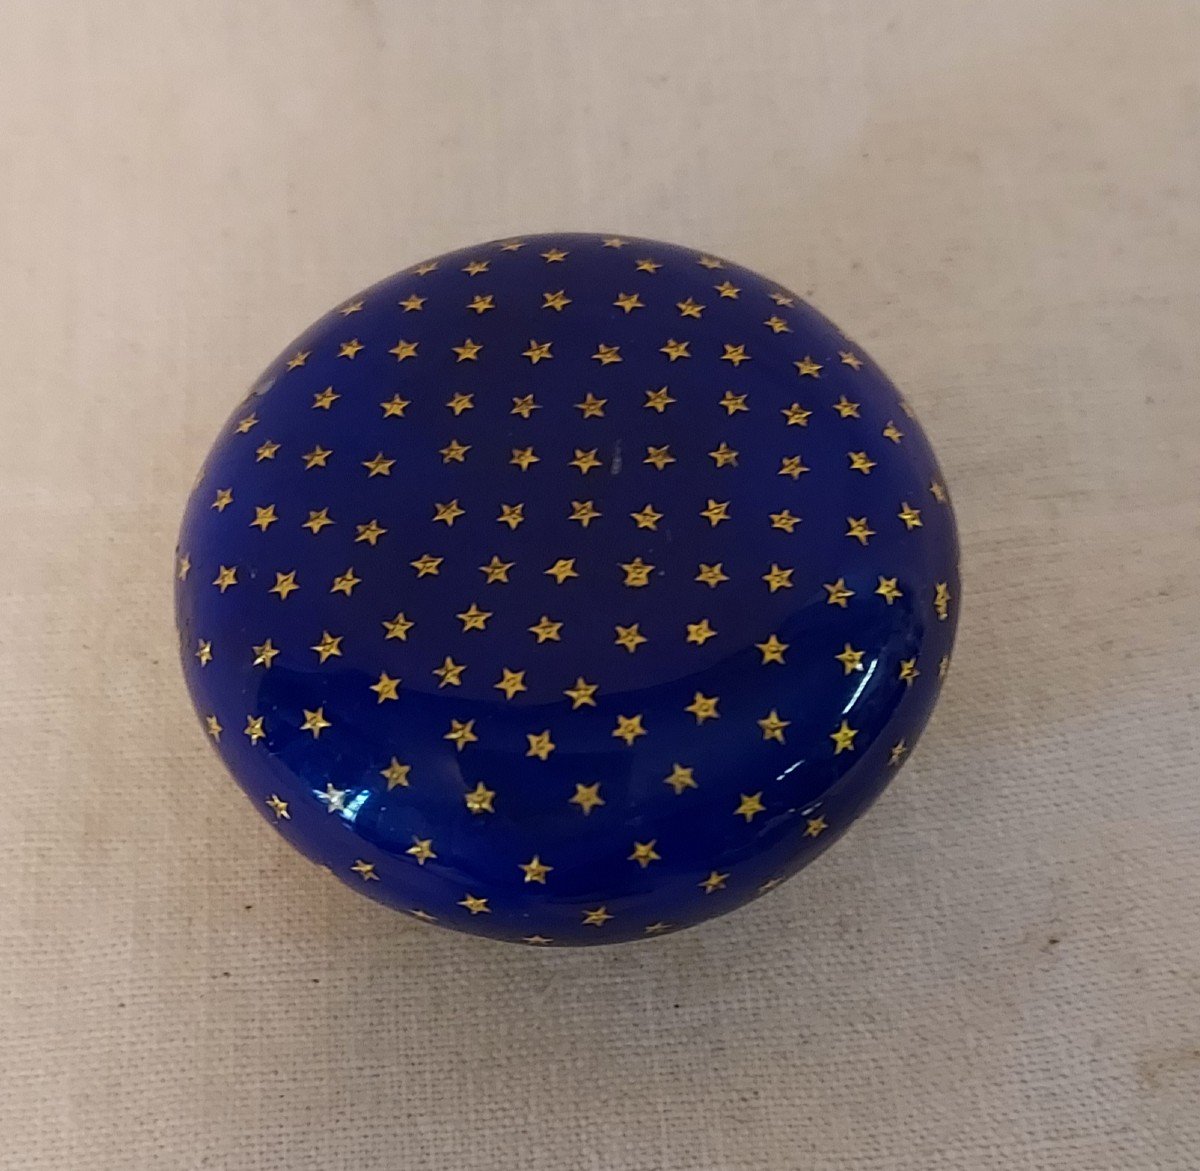 Pill Box In Bressan Enamel With Flowered, Beaded And Starry Decor From The 19th Century -photo-3